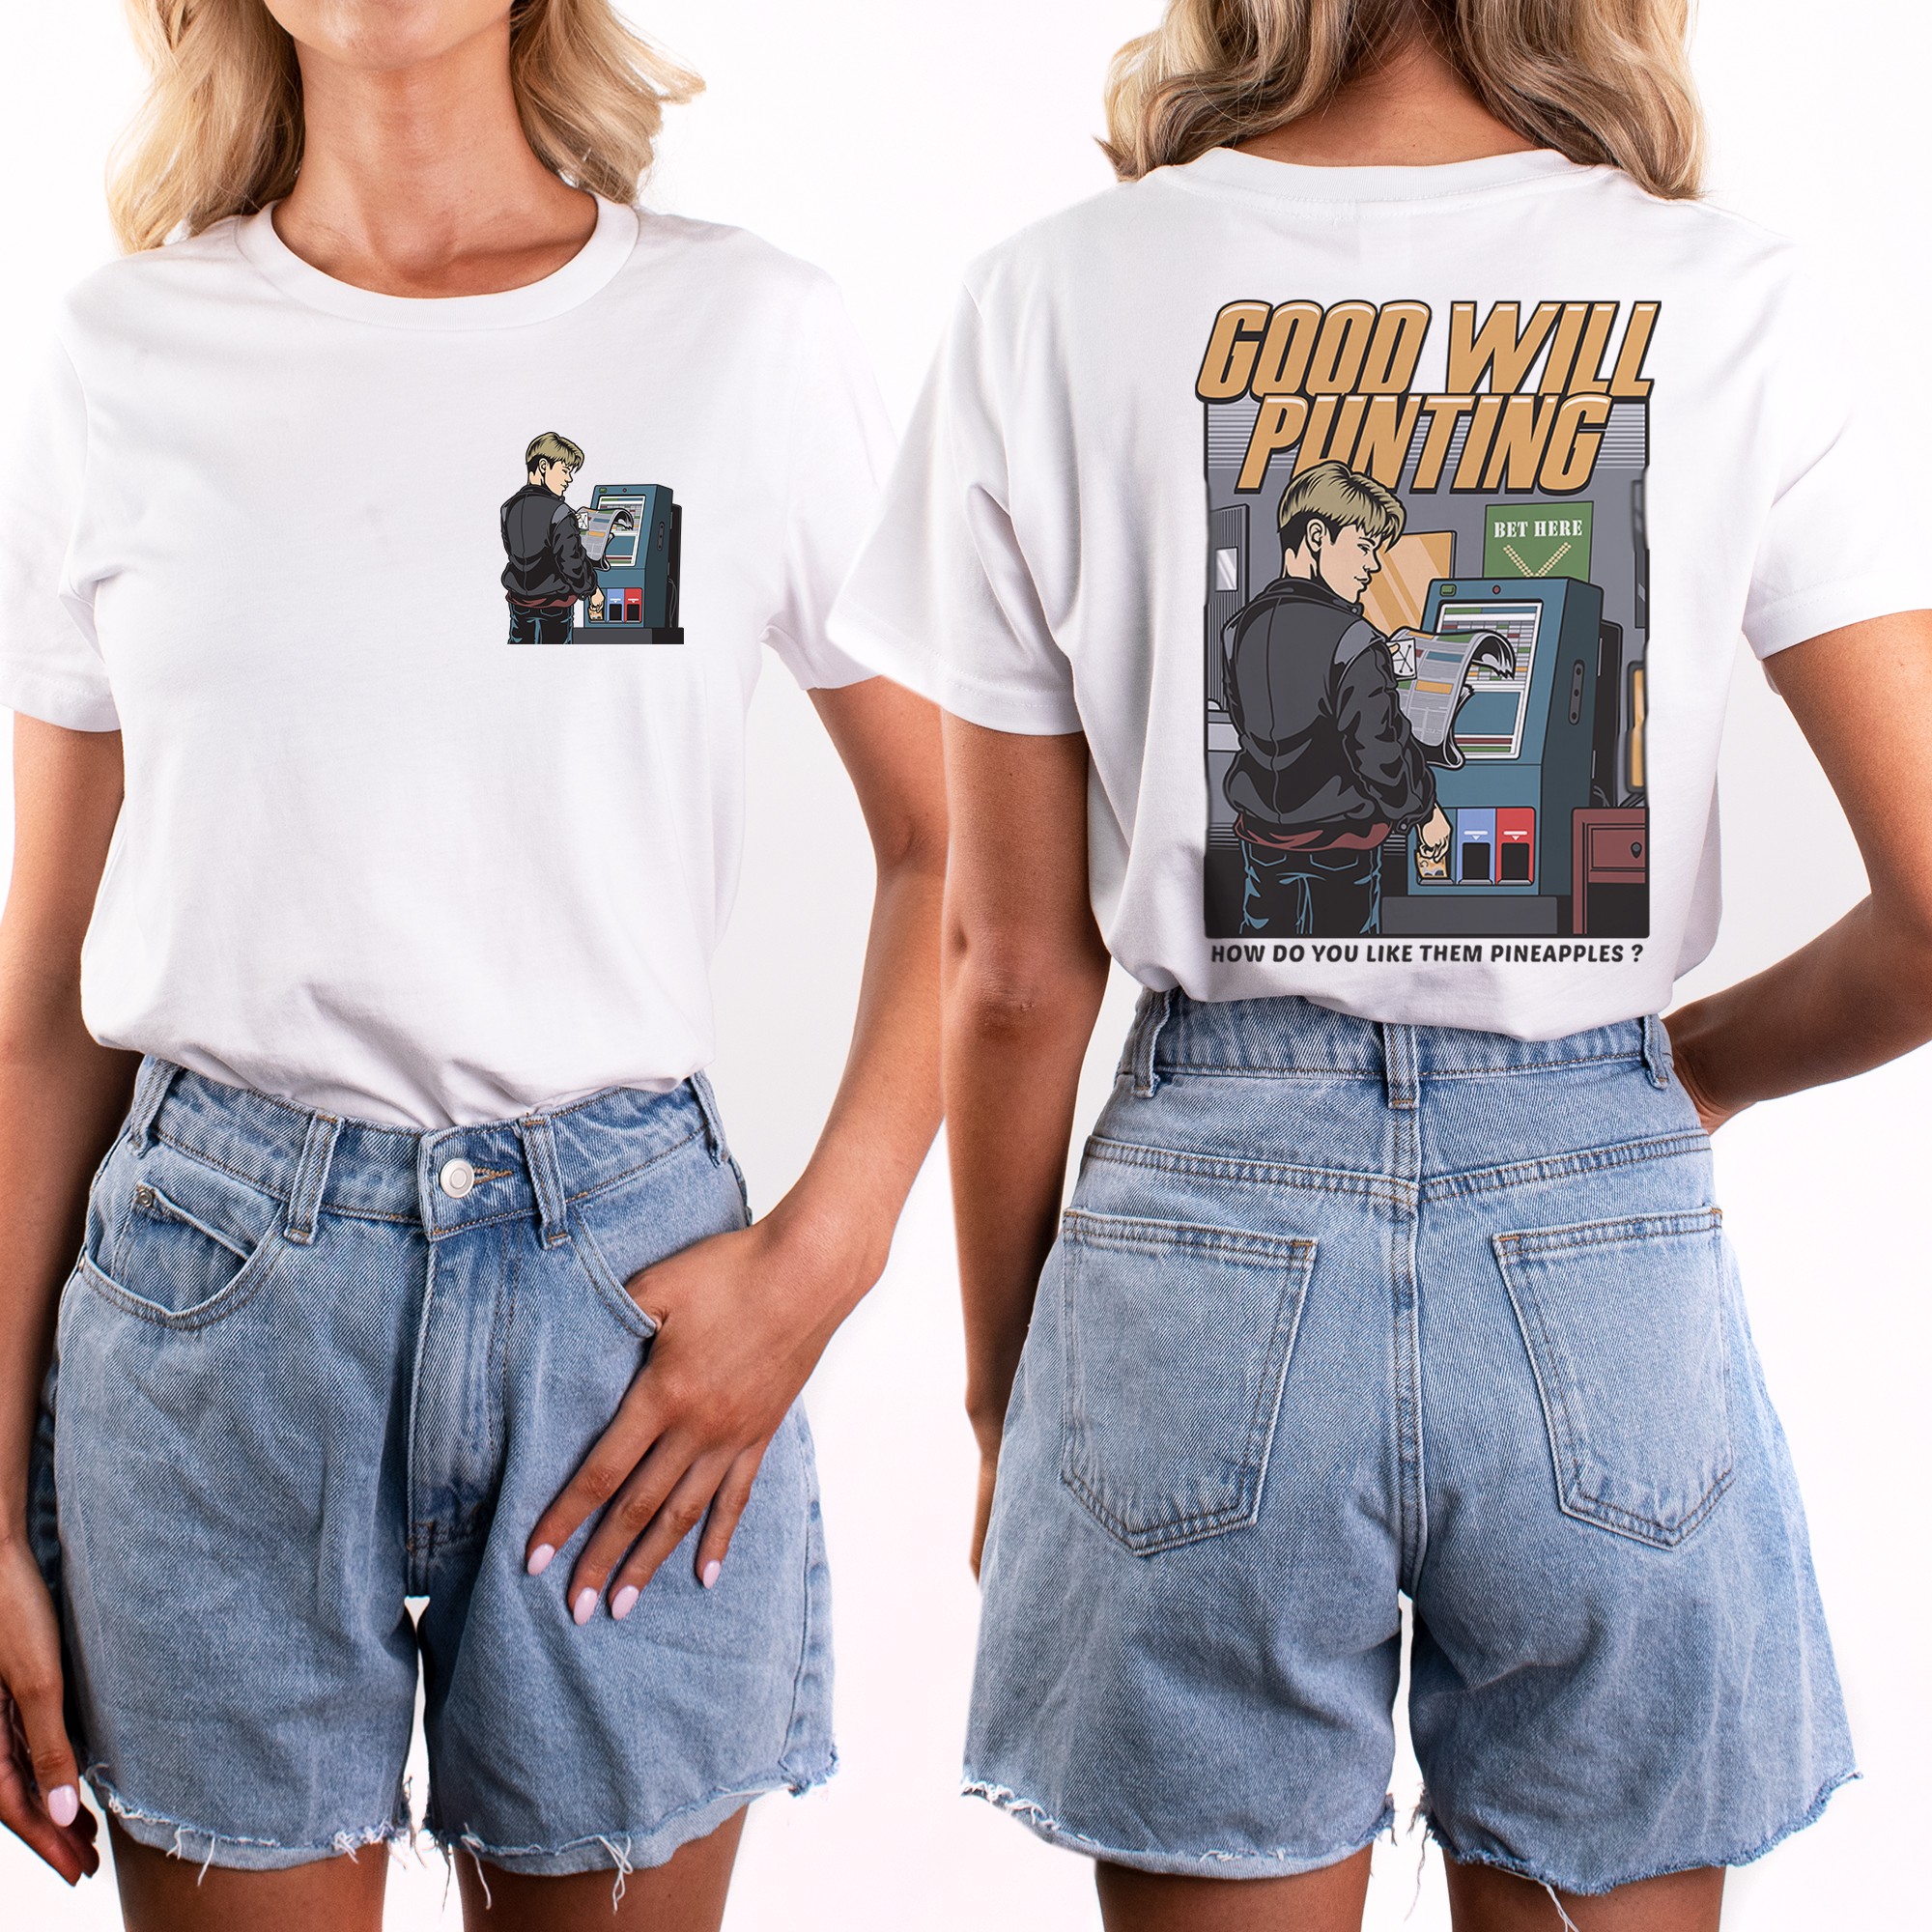 GOOD WILL PUNTING FRONT AND BACK WOMENS TEE